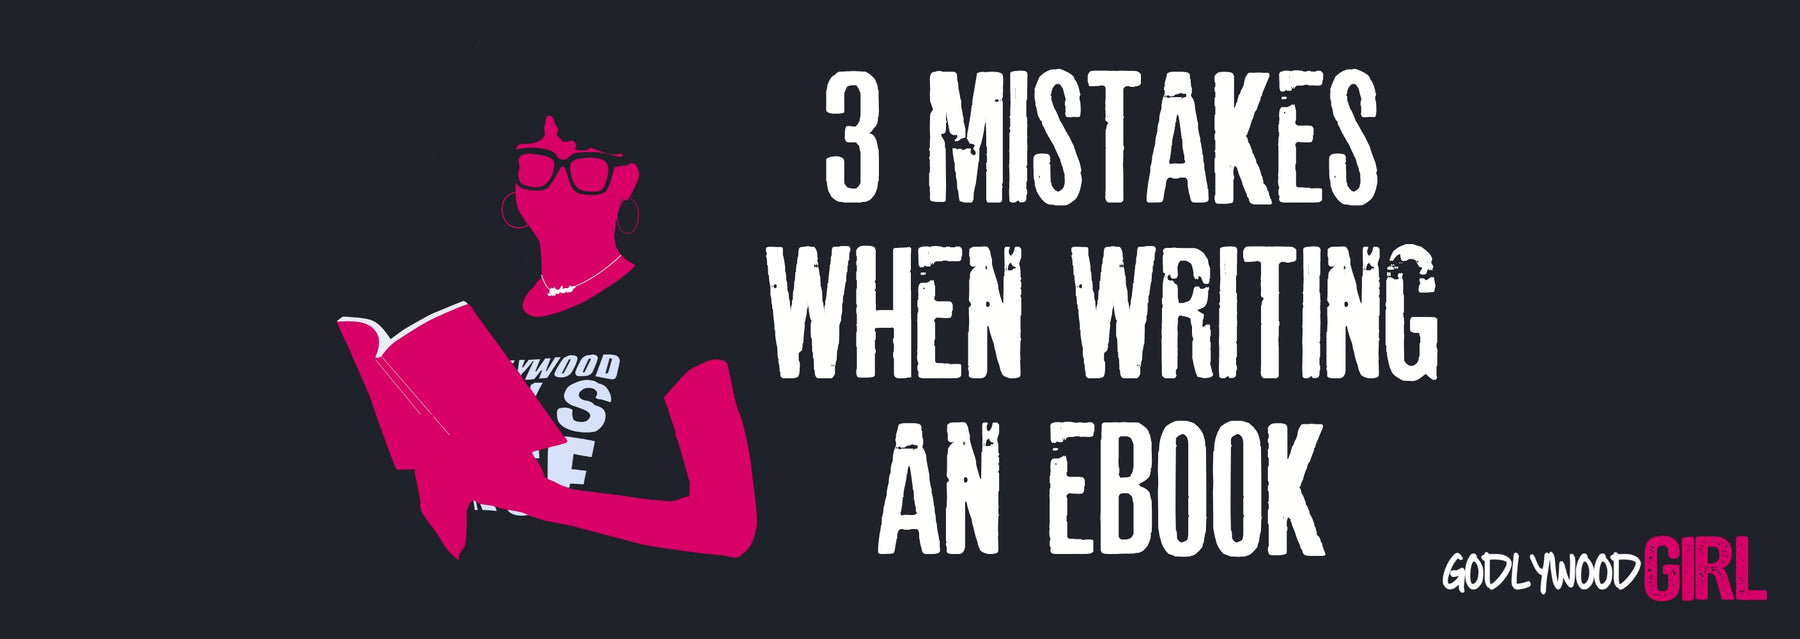 Write An eBook | 3 MISTAKES NEW AUTHORS MAKE WHEN WRITING AN EBOOK FOR THE 1ST TIME (Entrepreneur)